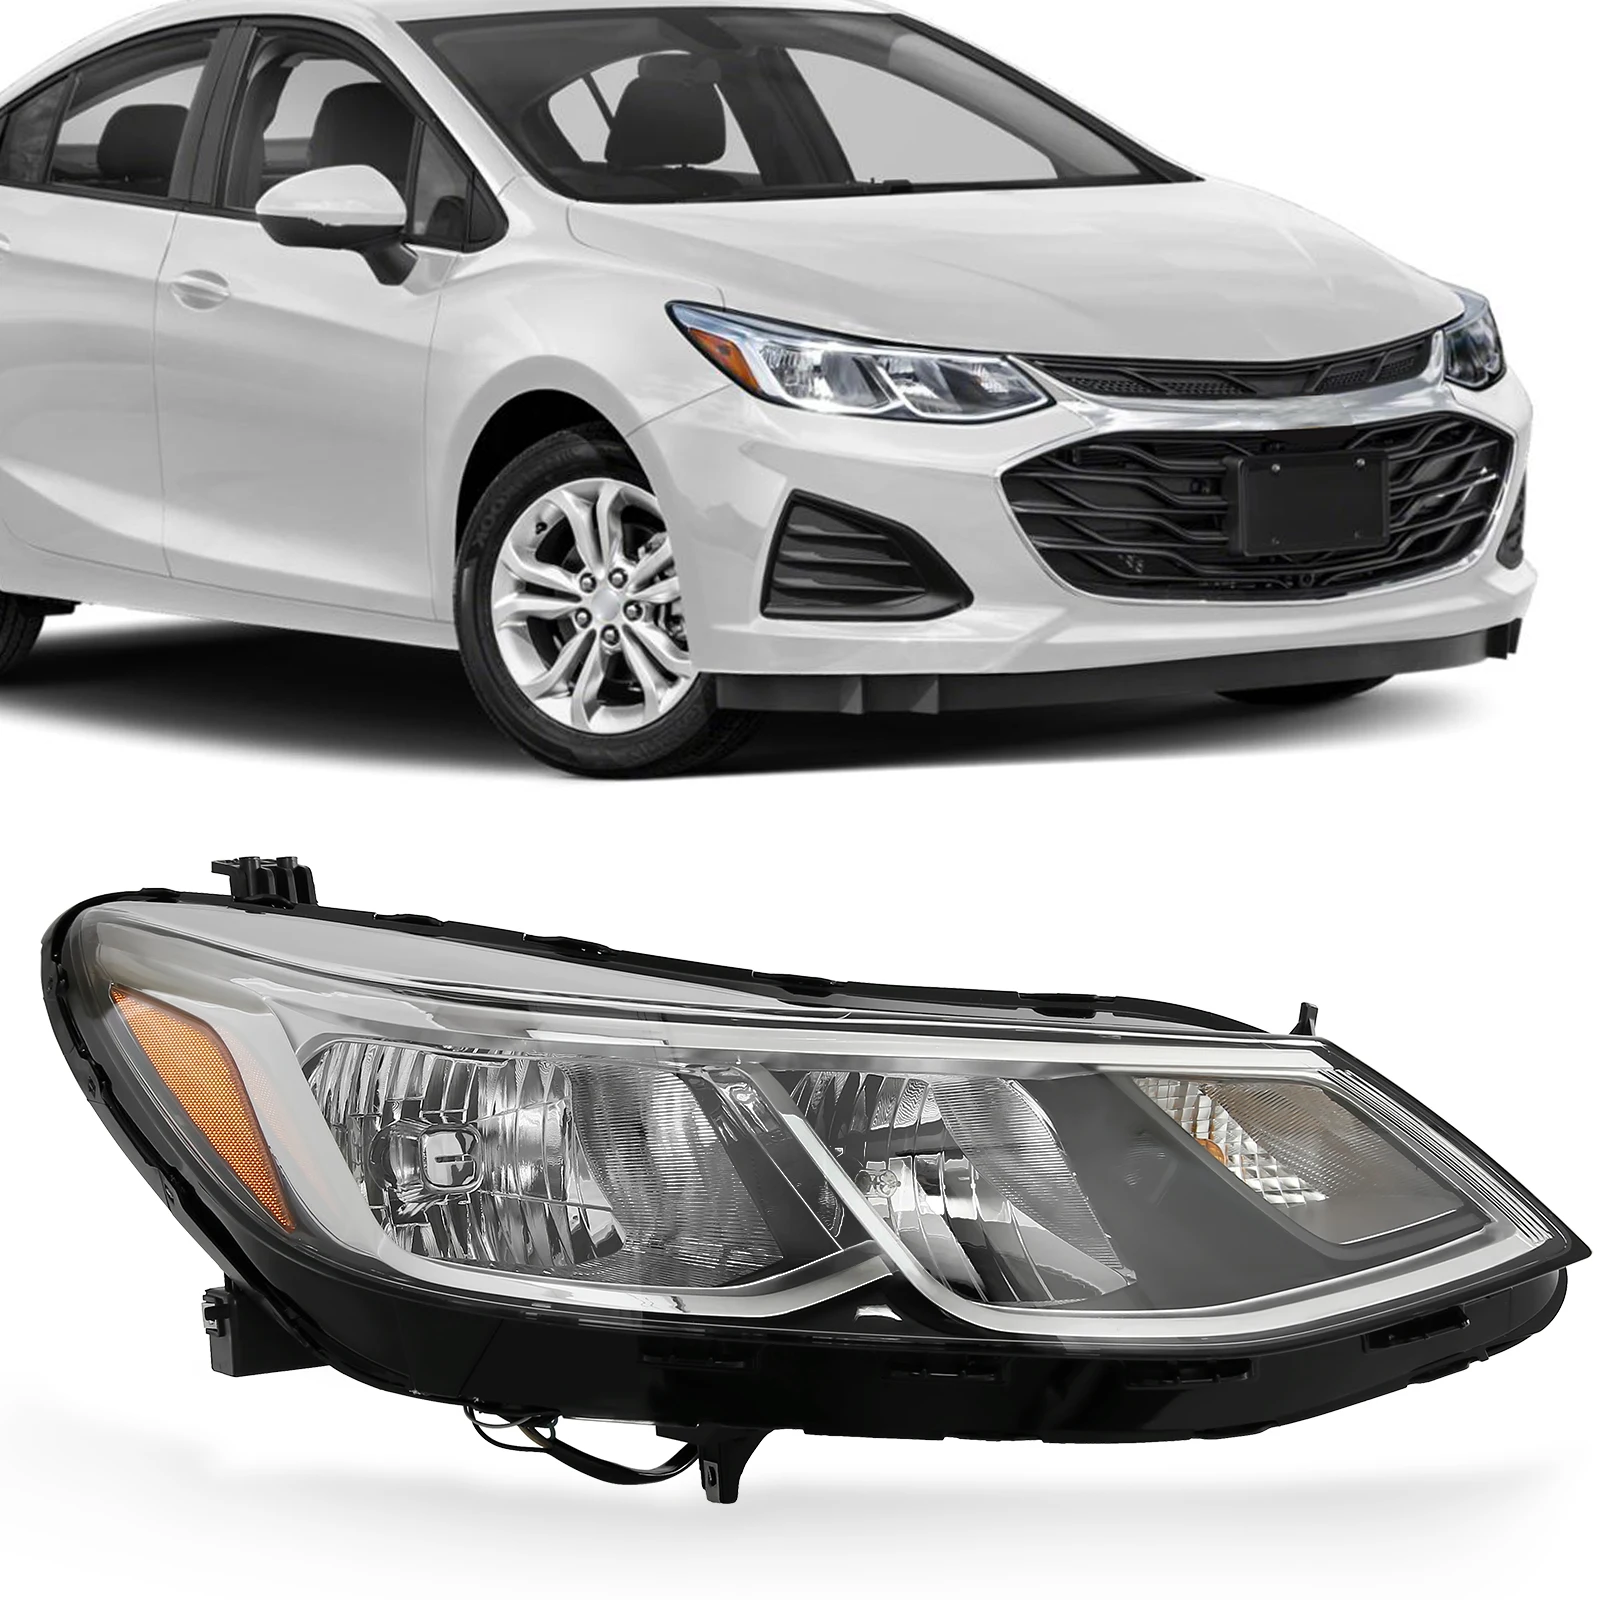 

Halogen Headlight Assembly For Chevy Cruze 2016 2017 2018 2019 Car Light Headlamp W/O Projector Passenger Right Side RH